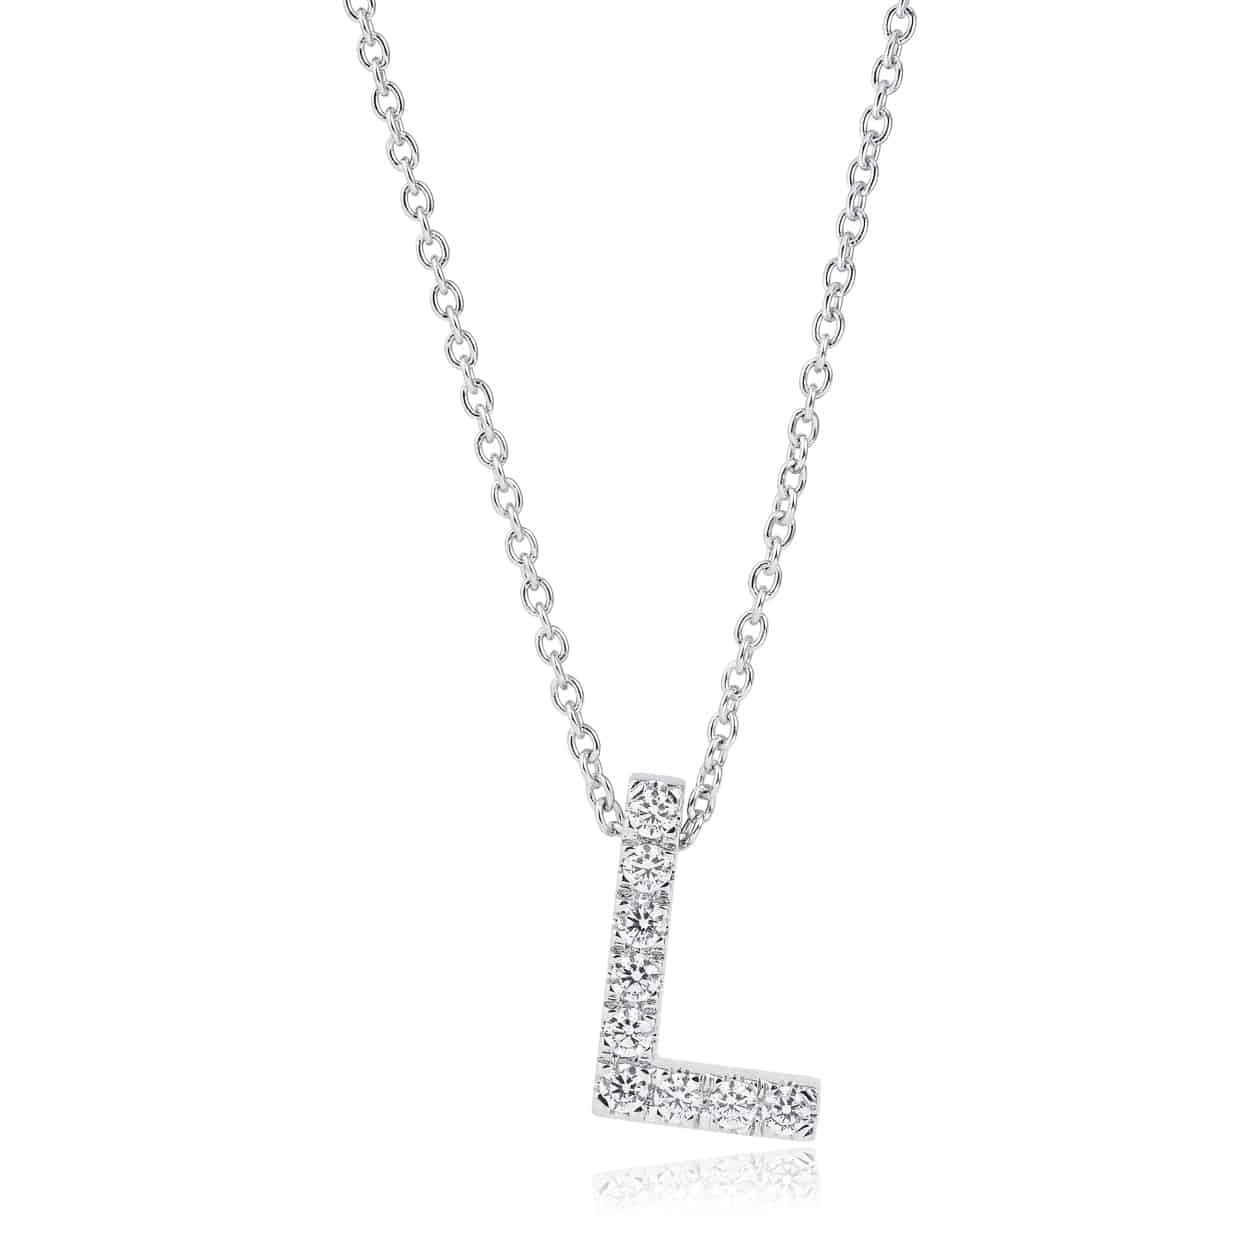 Pendants & Necklaces - Newcastle - Whitakers Jewellers